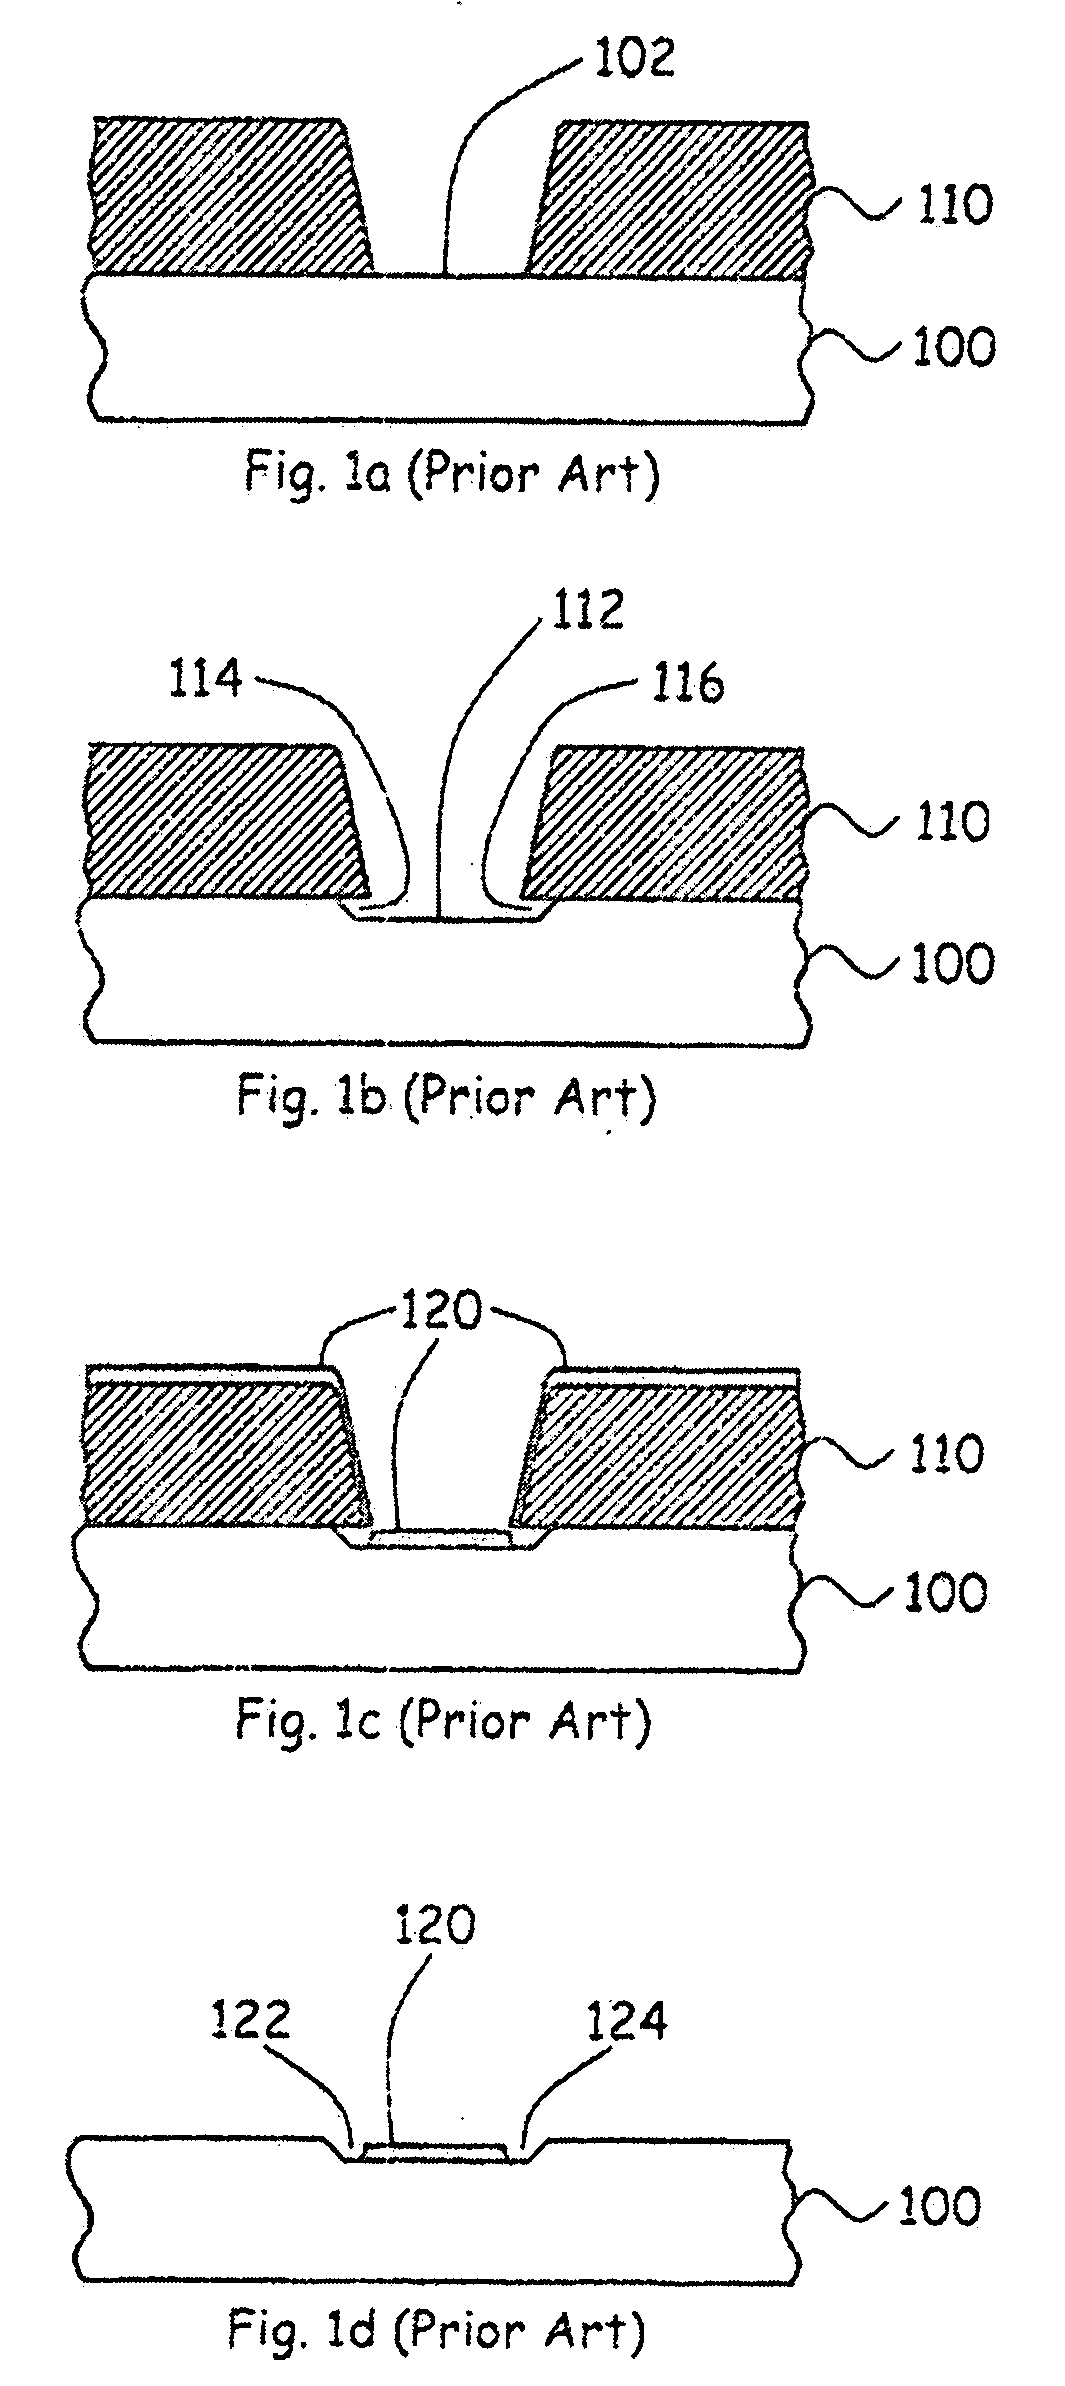 Methods of Minimizing Etch Undercut and Providing Clean Metal Liftoff